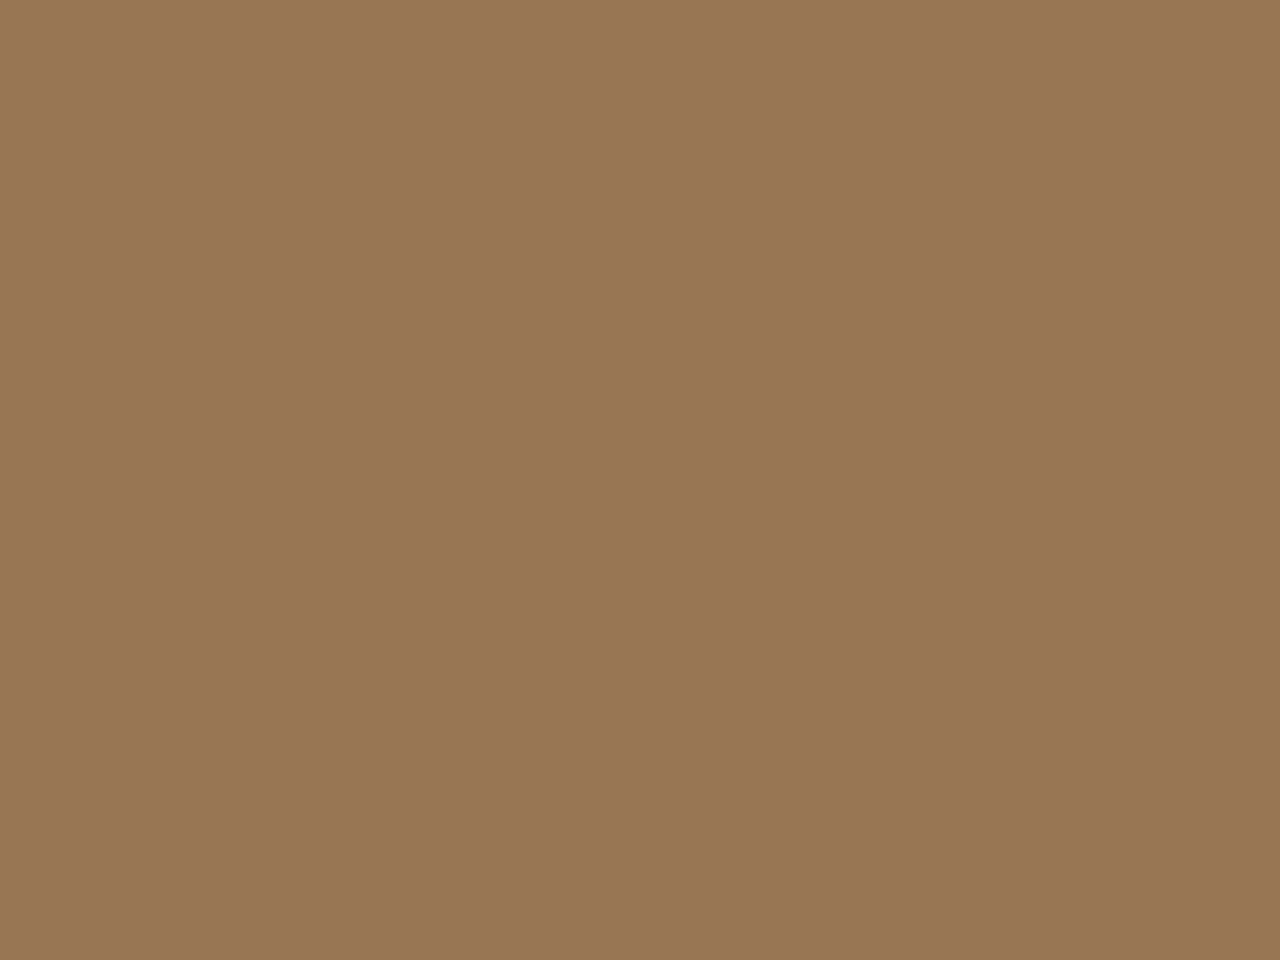 1280x960 Pale Brown Solid Color Background